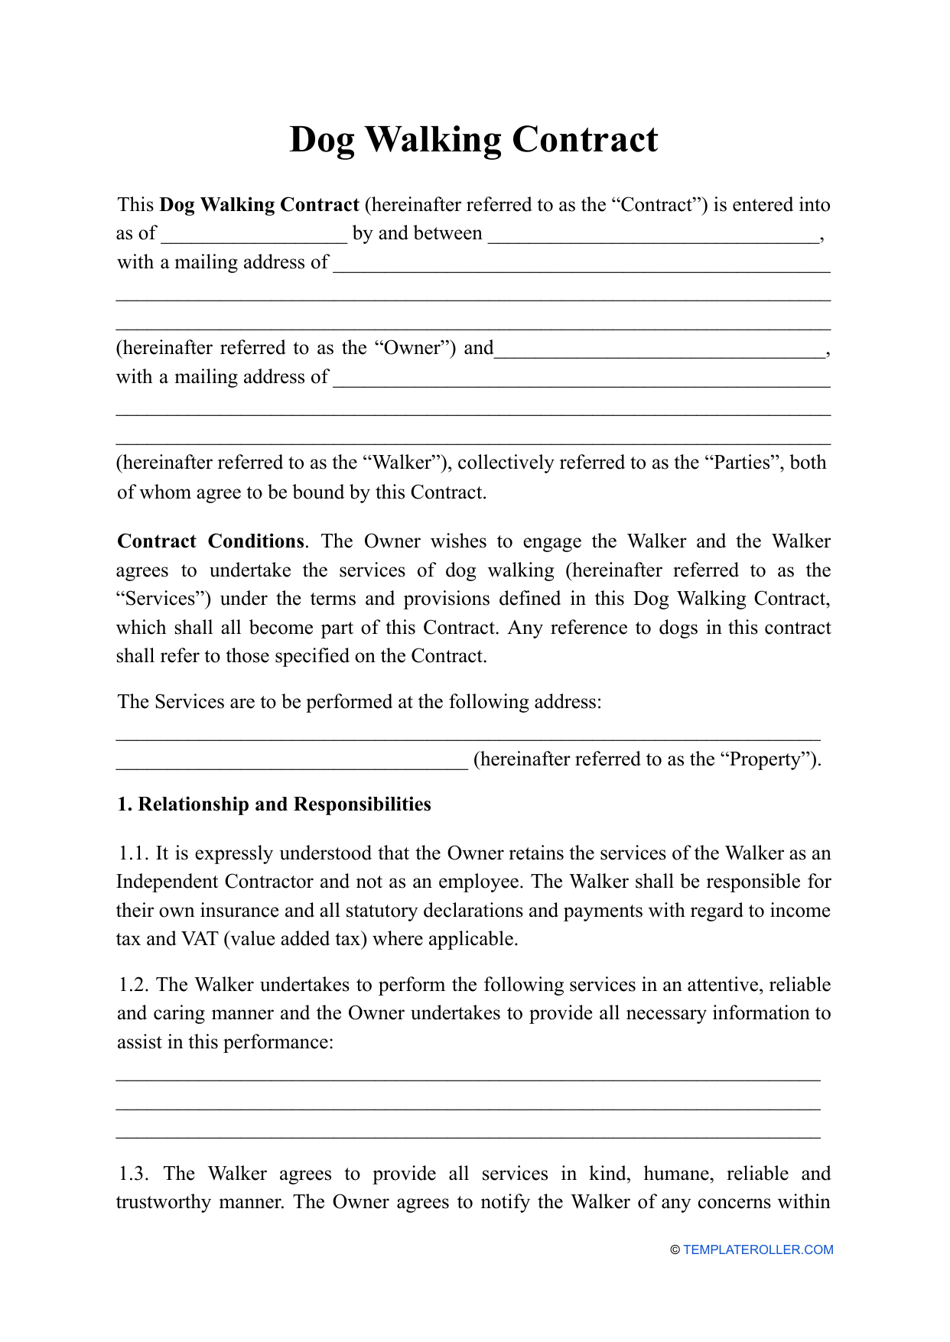 Dog Walking Contract Template, Page 1